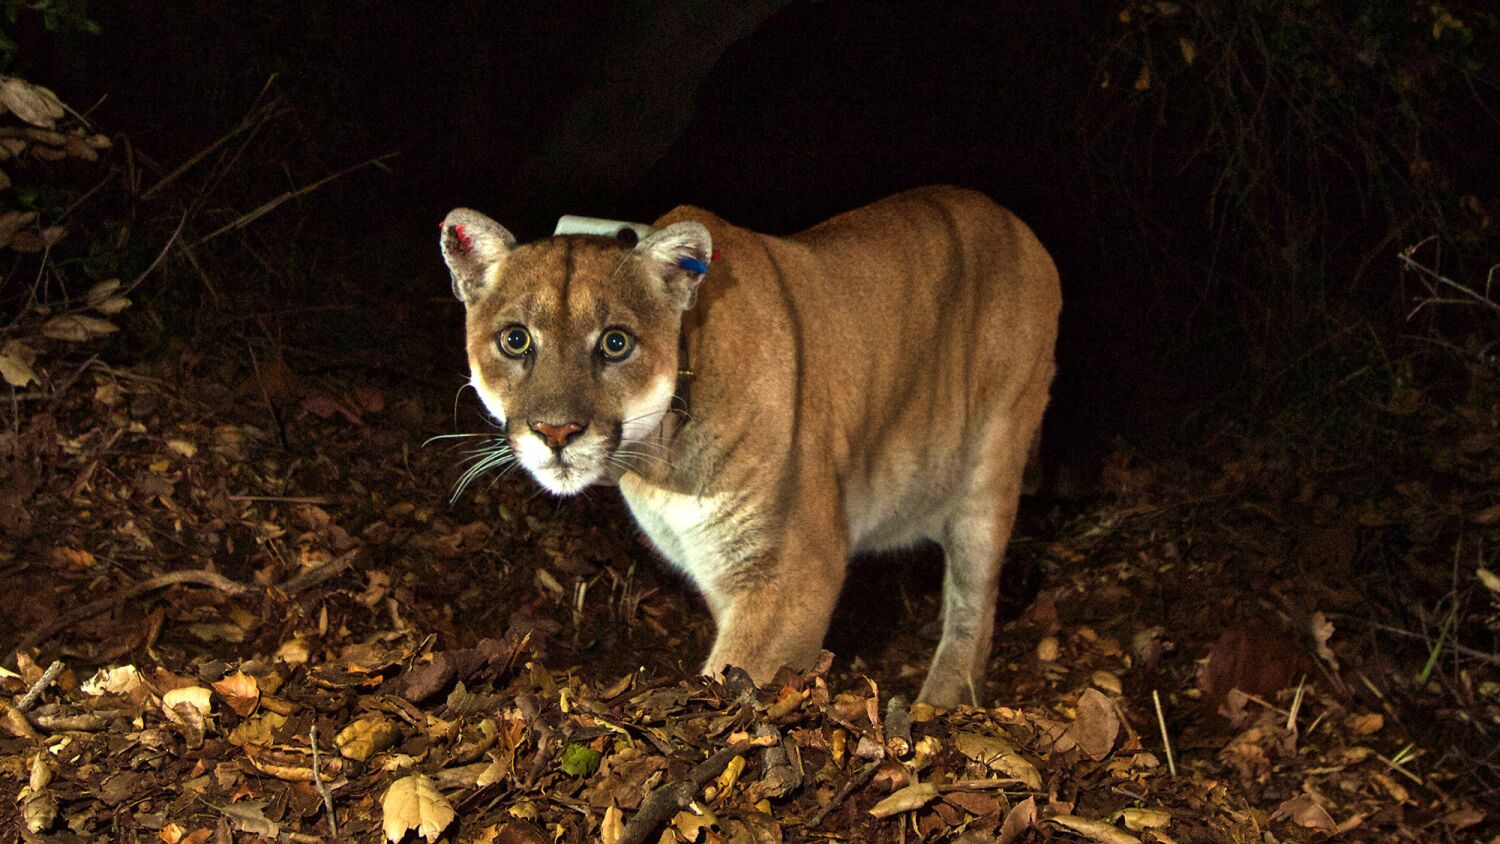 Mourning 'L.A.'s coolest cat' and celebrating how P-22 changed our relationship with nature